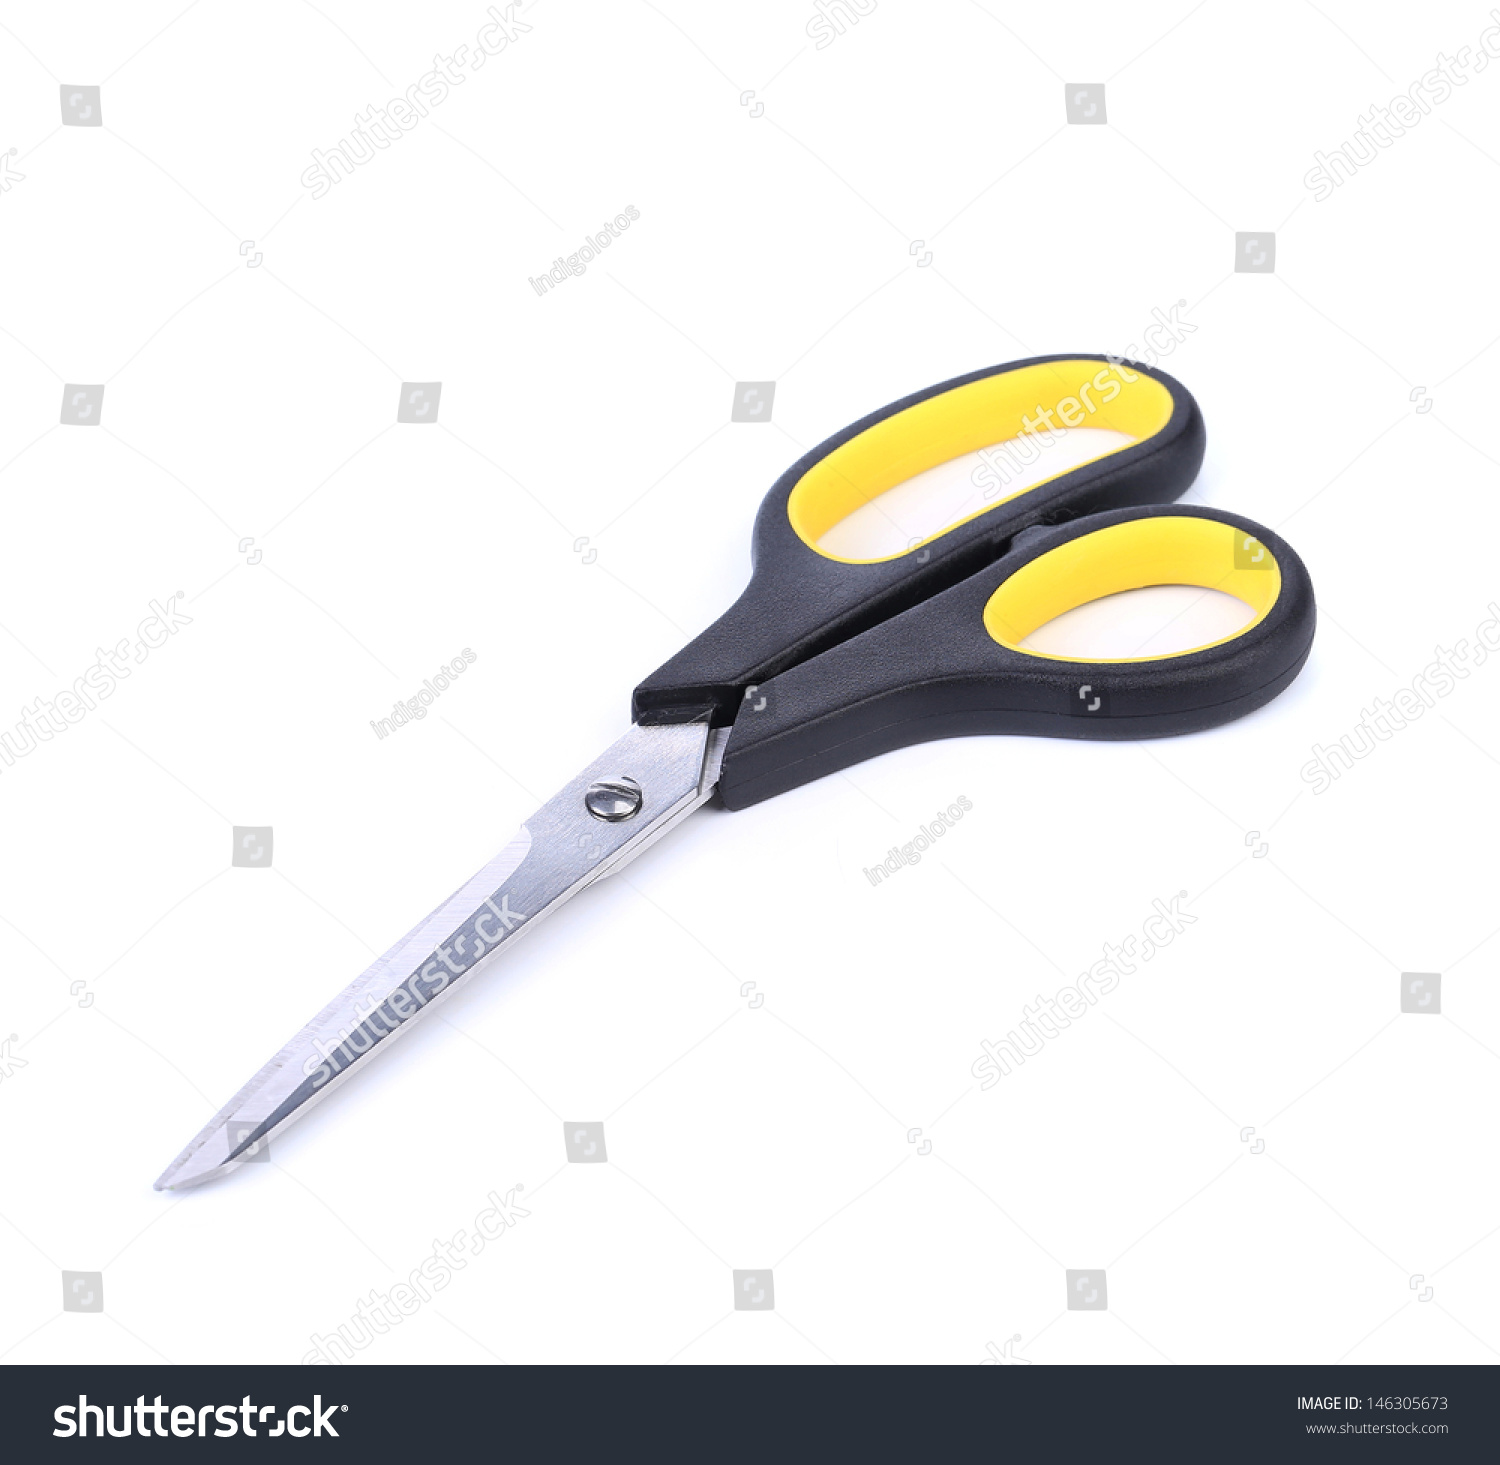 Pair Of Scissors Isolated On A White Background Stock Photo 146305673 